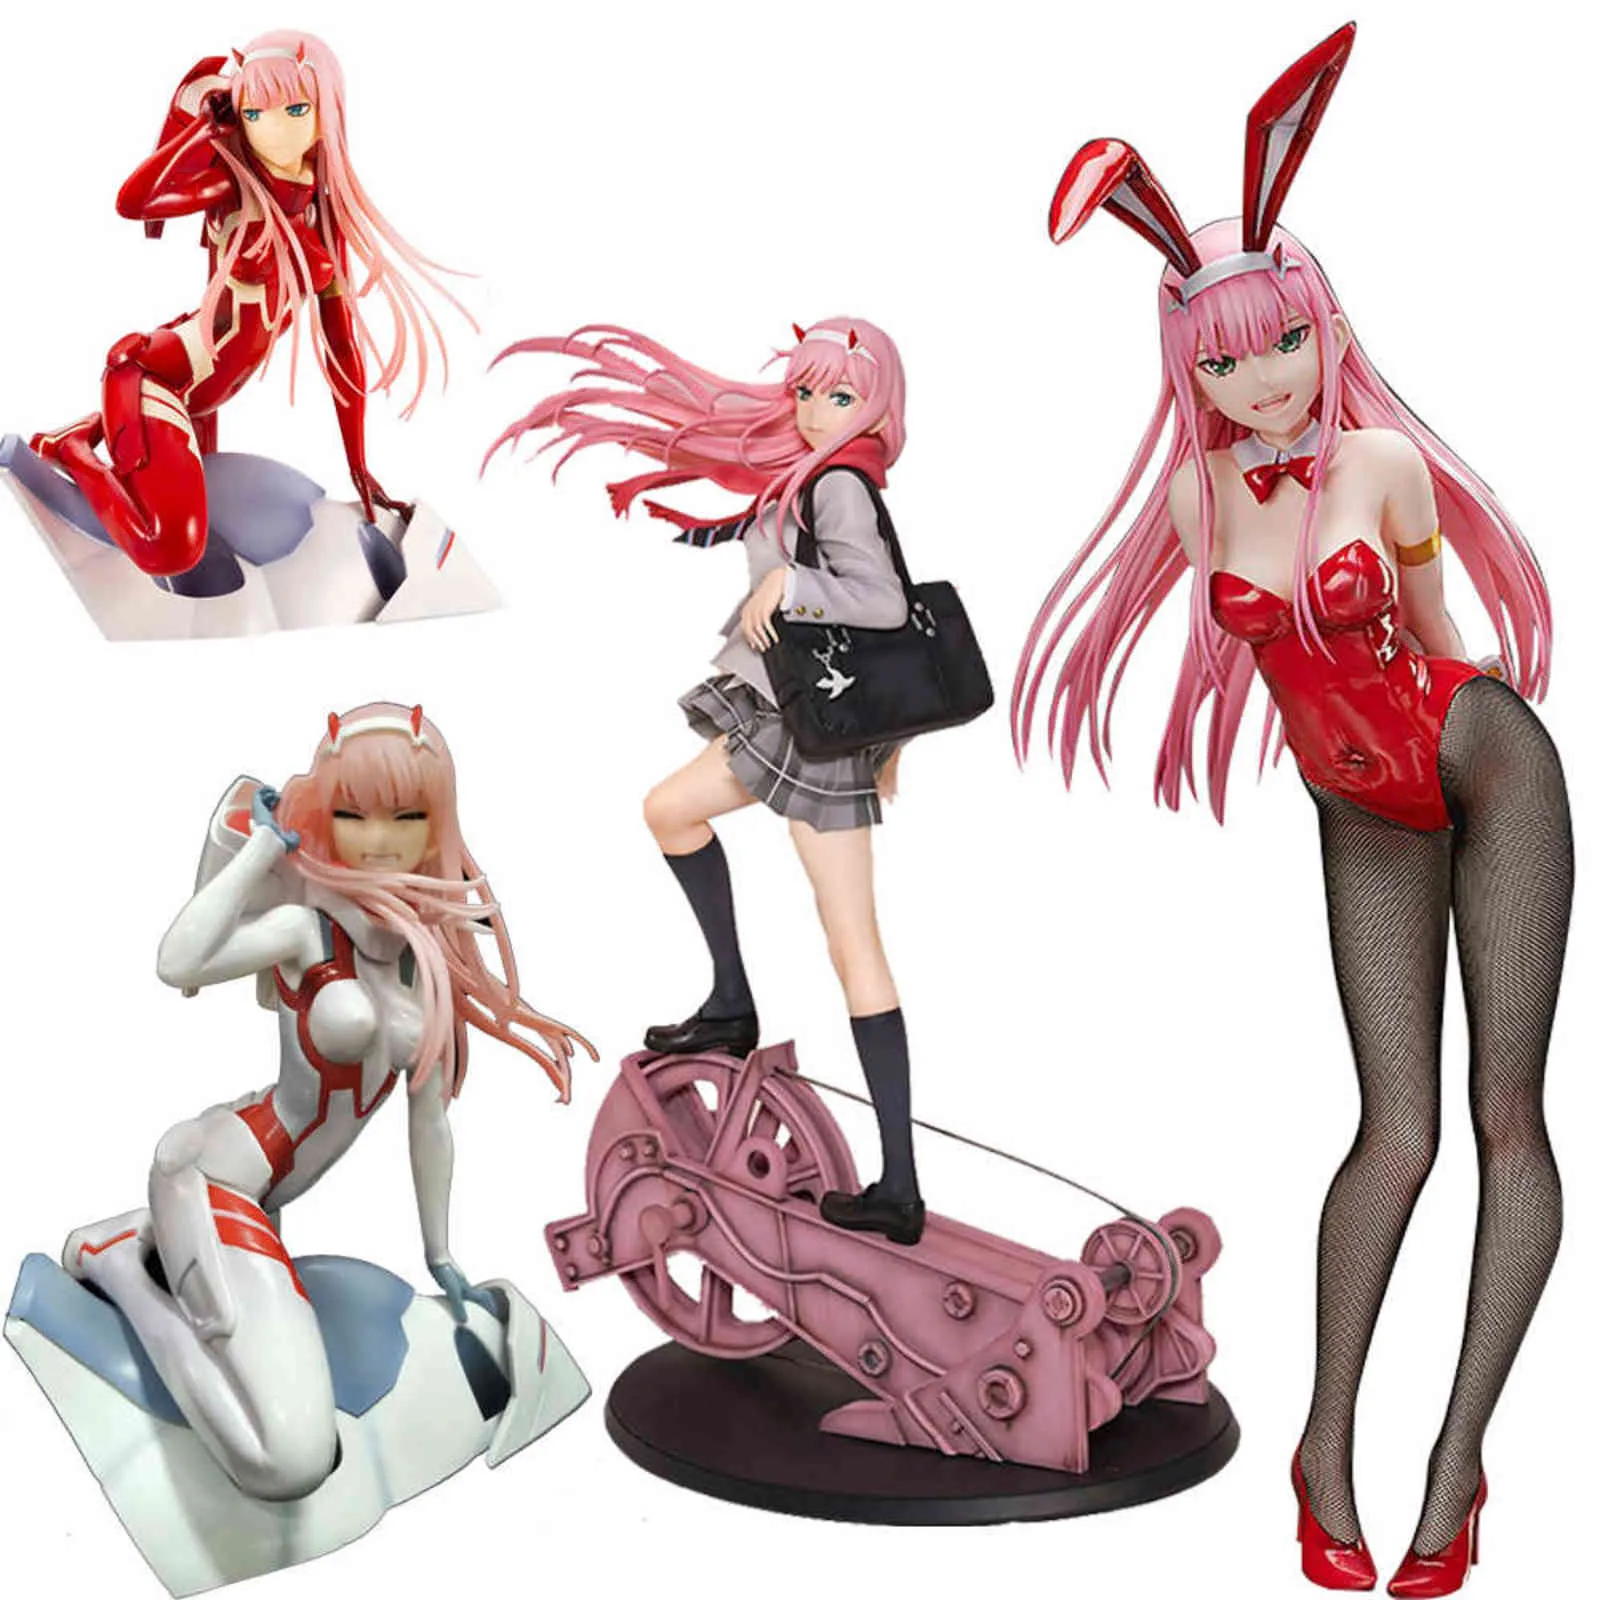 Anime Darling in the FRANXX Sexy Figure Zero Two 02 red clothes Anime PVC Action Figures toy Adult Collectible Model Doll Gifts H1105